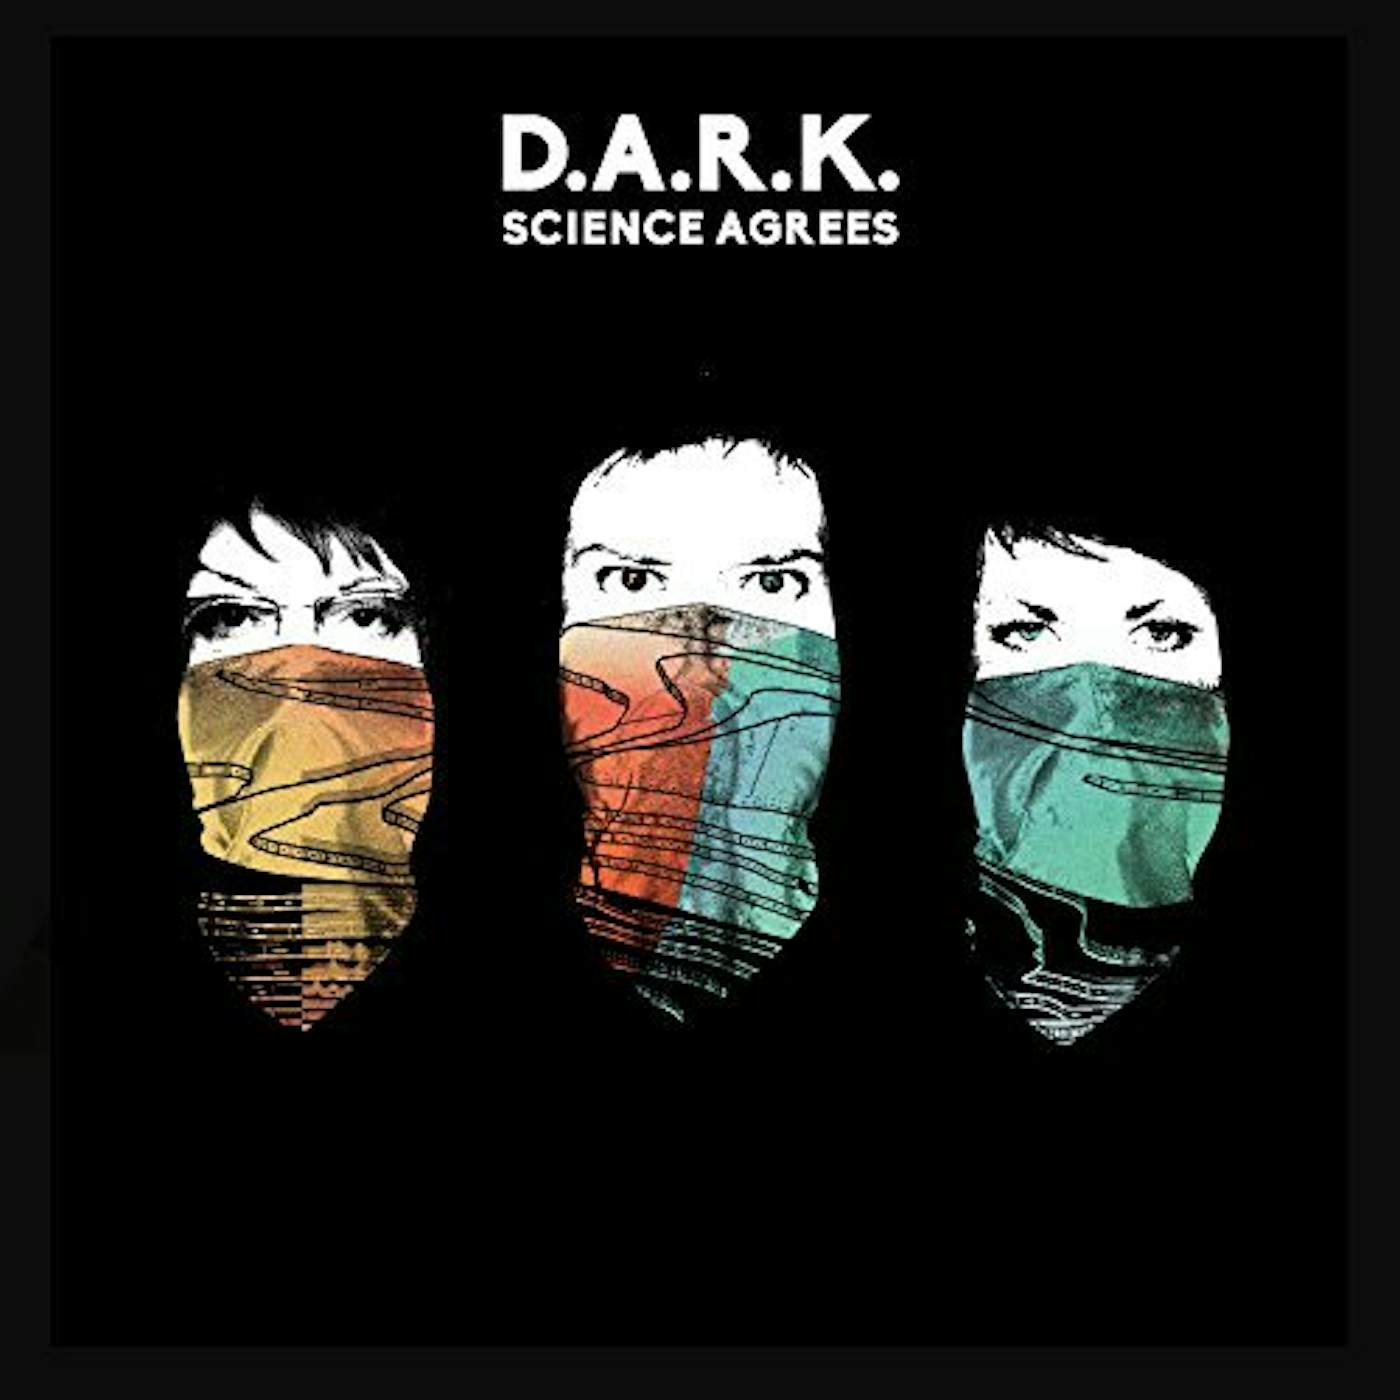 D.A.R.K. SCIENCE AGREES CD